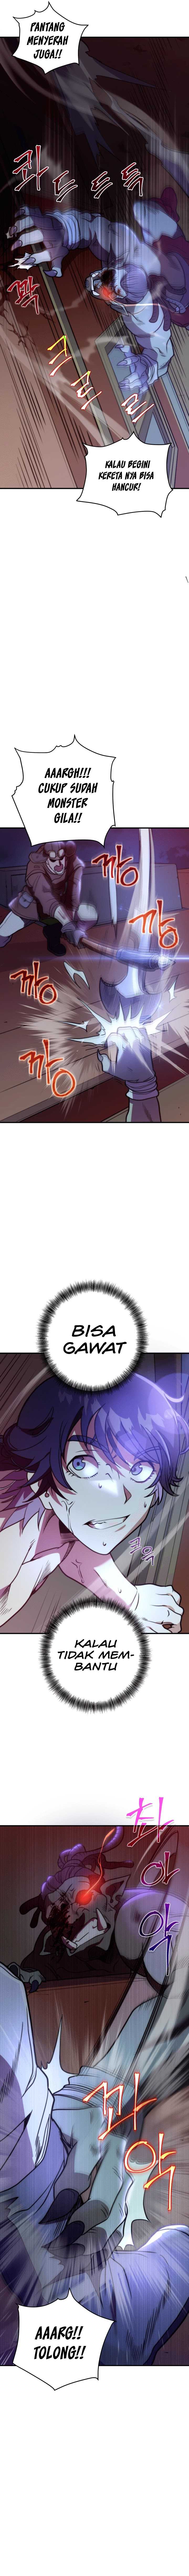 1RM’s Gigant Rider Chapter 03